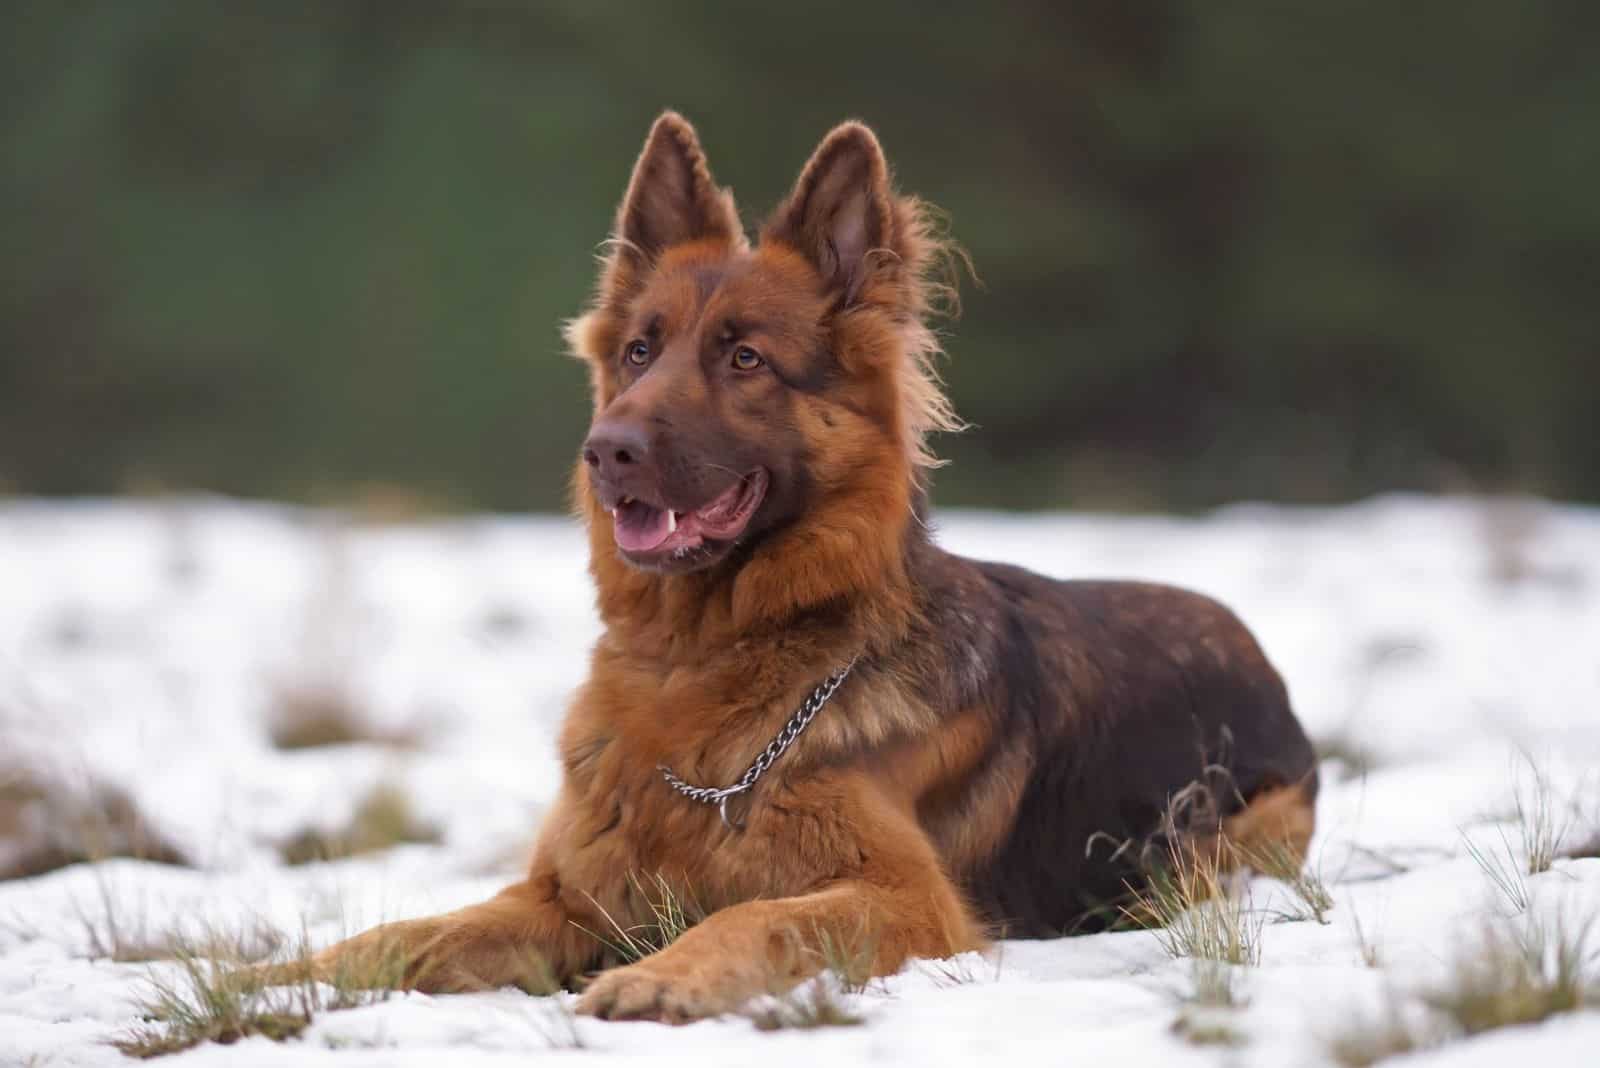 Adorable red and brown (or liver) long-haired German Shepherd dog with a chain collar posing outdoors lying down on a snow in winter